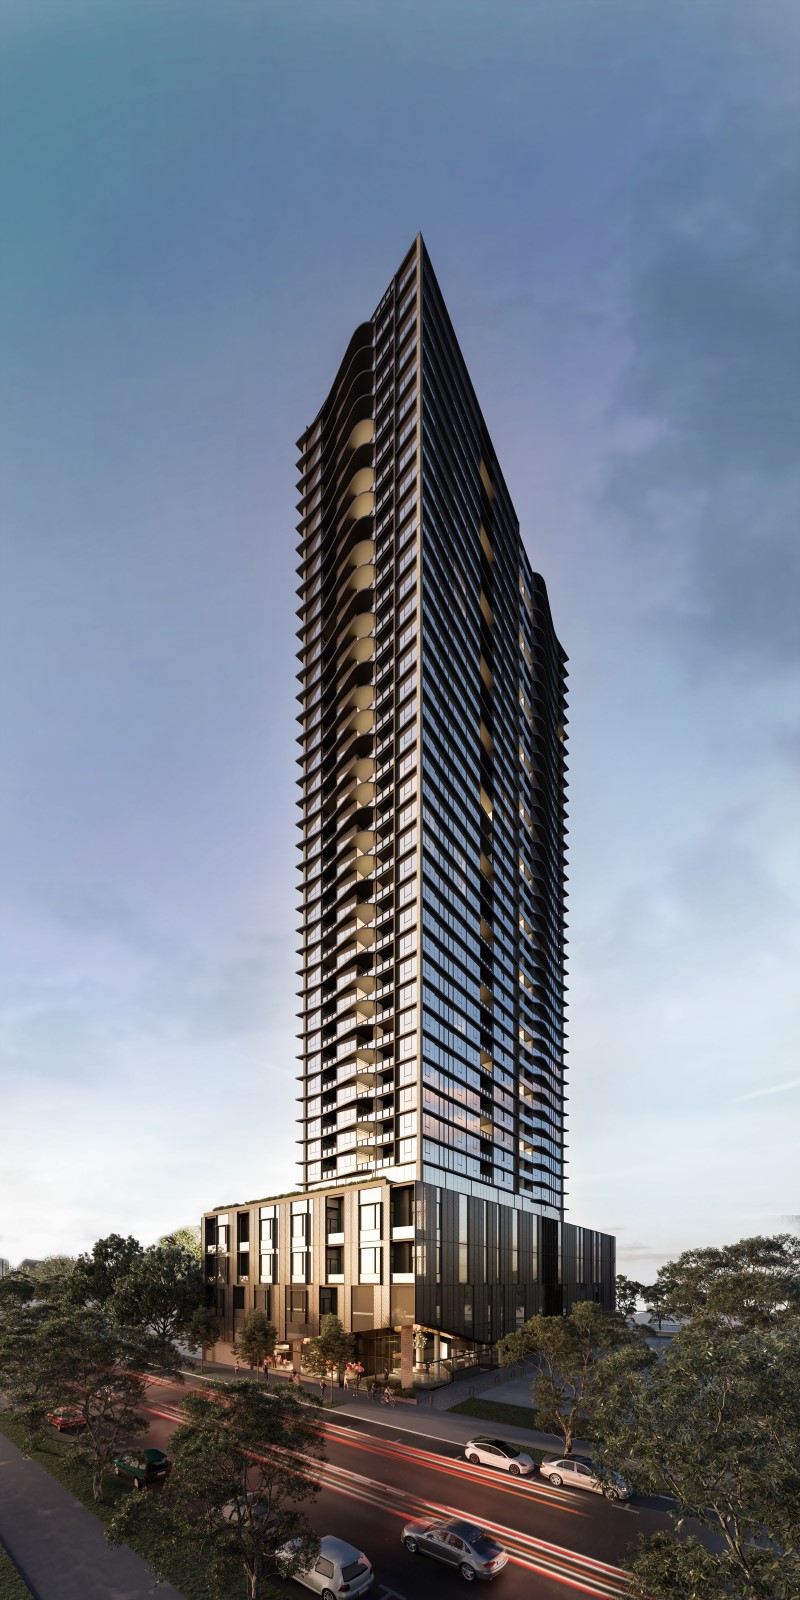 CHT Architects' render of Local Residential's build-to-rent tower in South Melbourne.